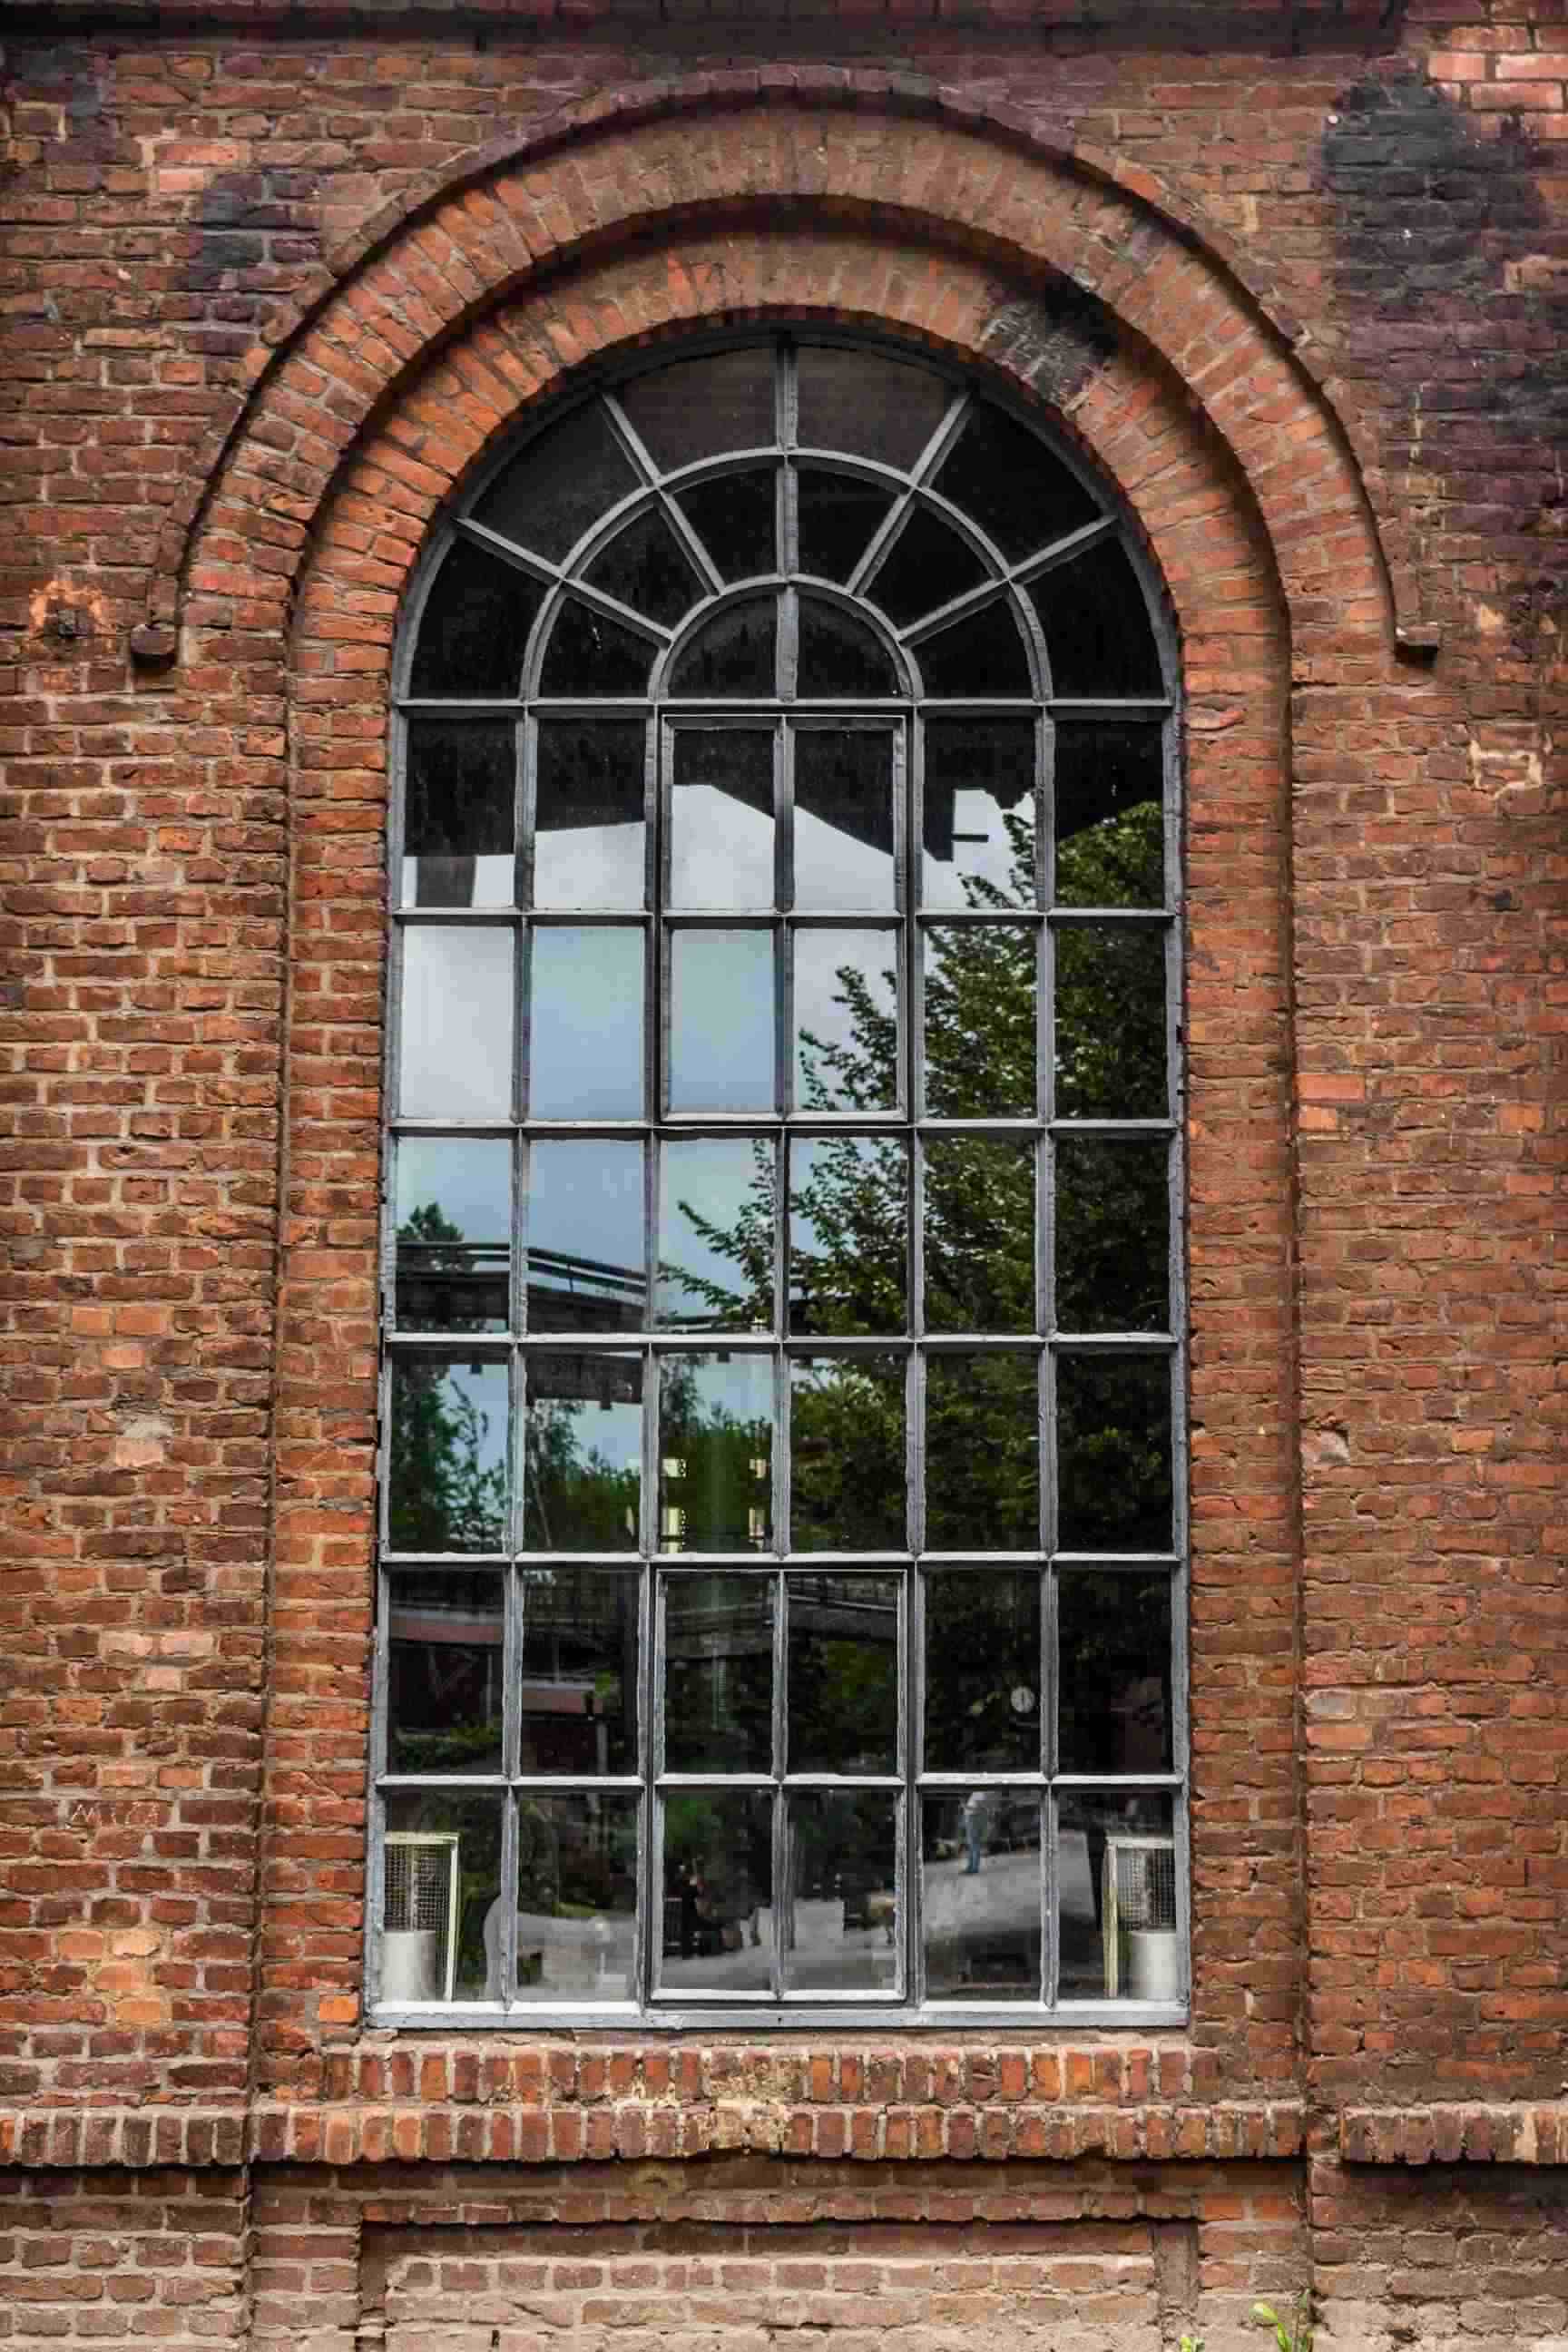 Arched window in Brick Building